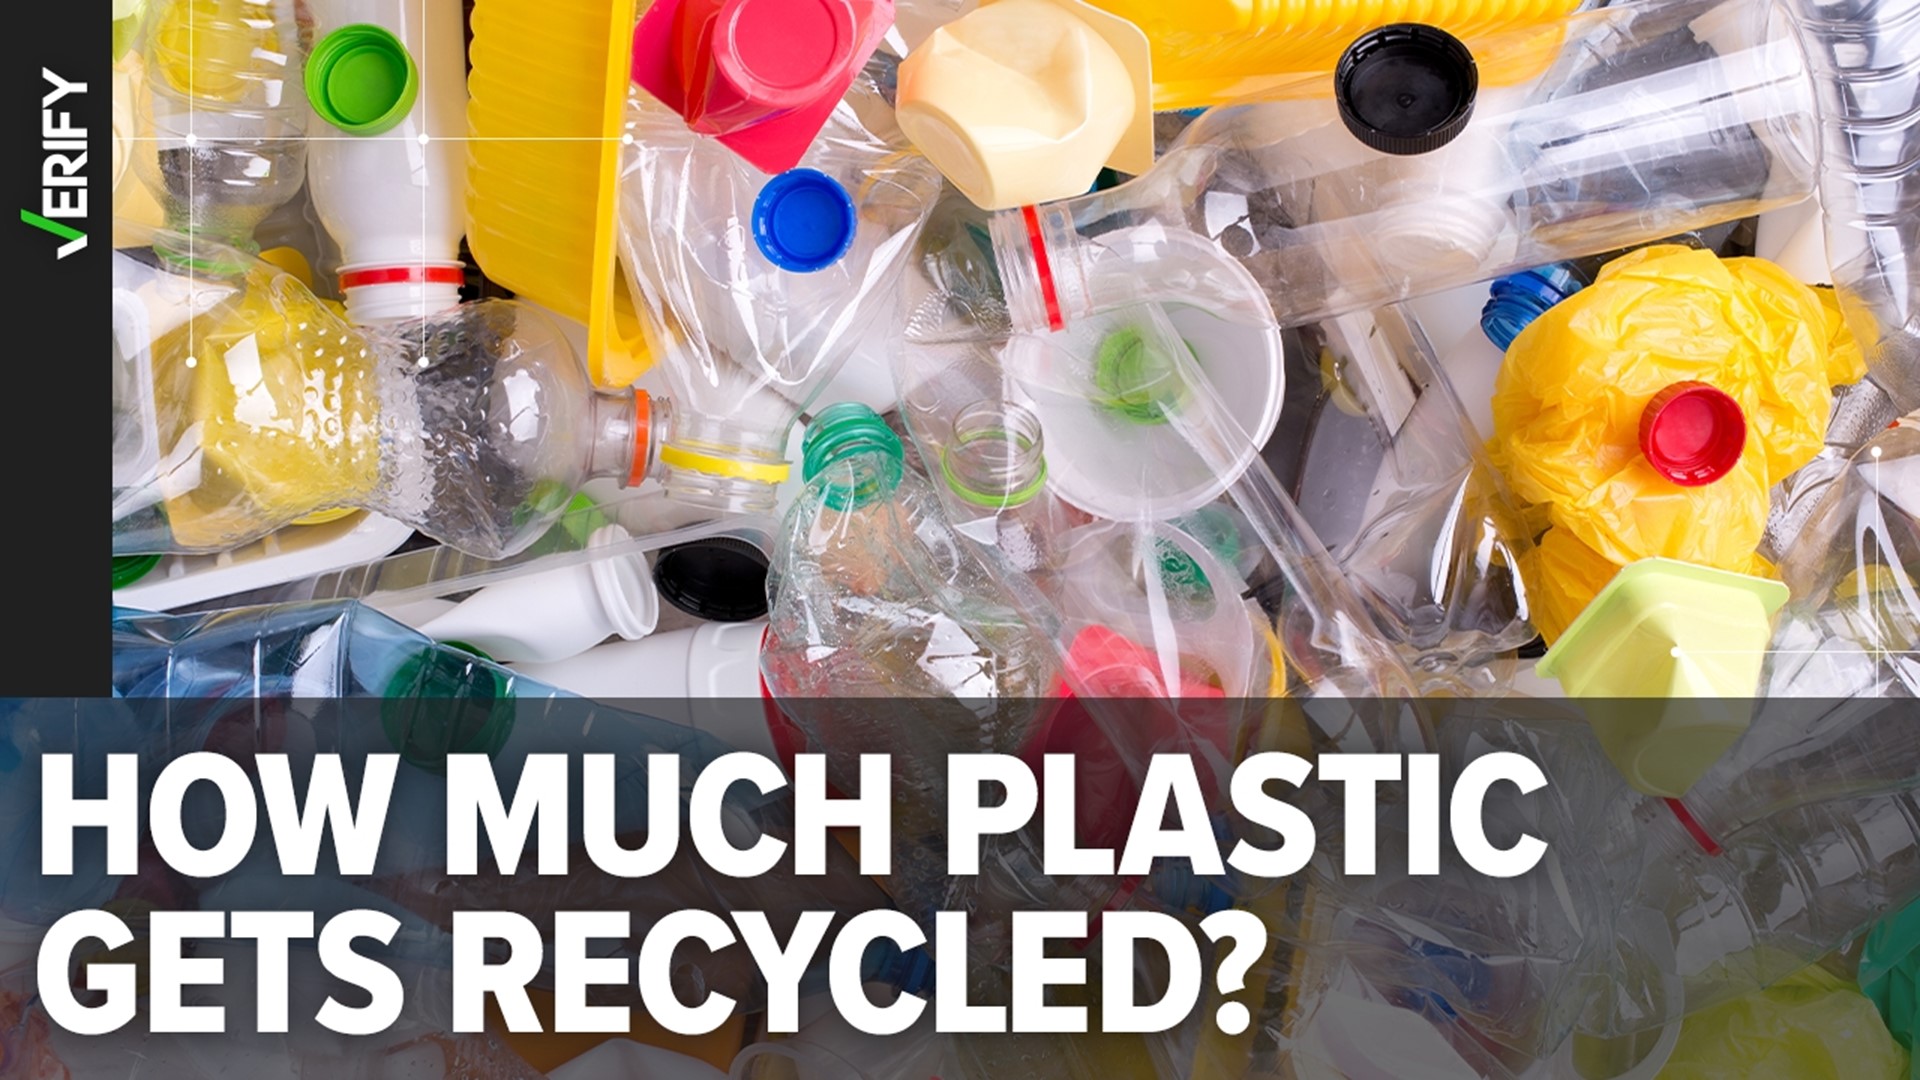 Many say only 5-9% of plastic is recycled while the rest is sent to landfills. But that’s all plastics, not just plastics you put in your recycle bin.